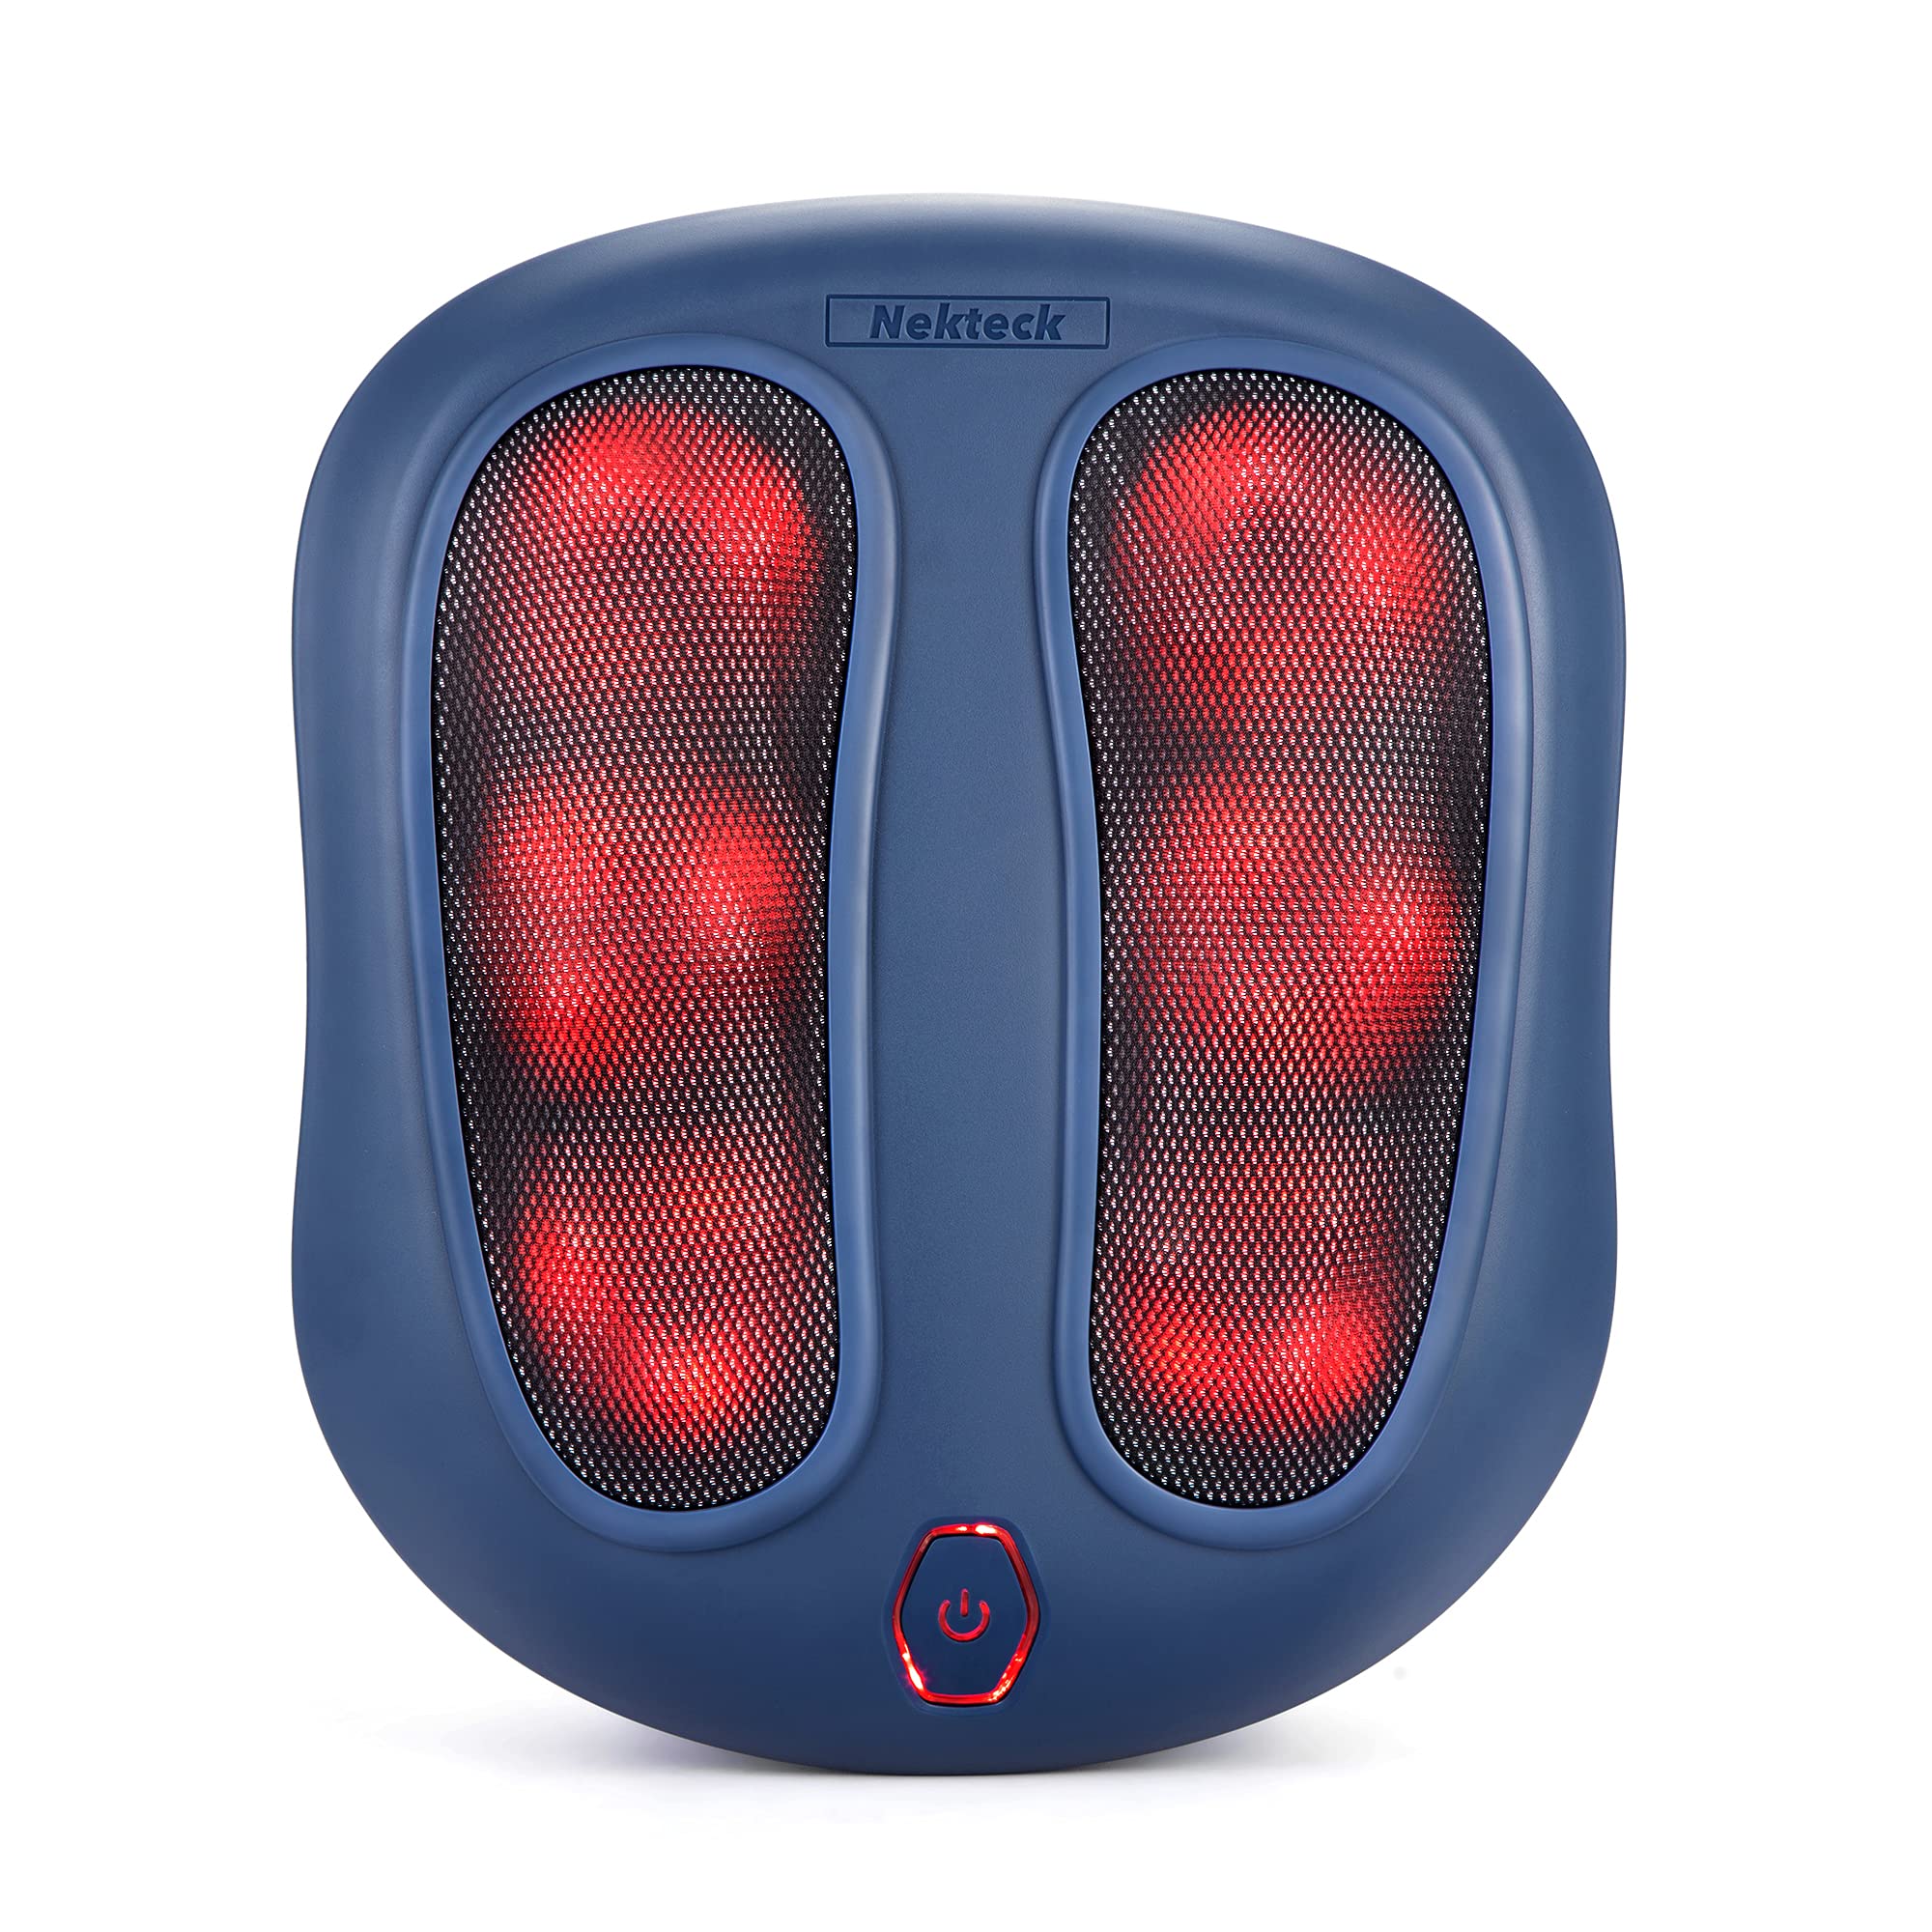 Nekteck Shiatsu Neck and Back Massager with Soothing Heat Electric